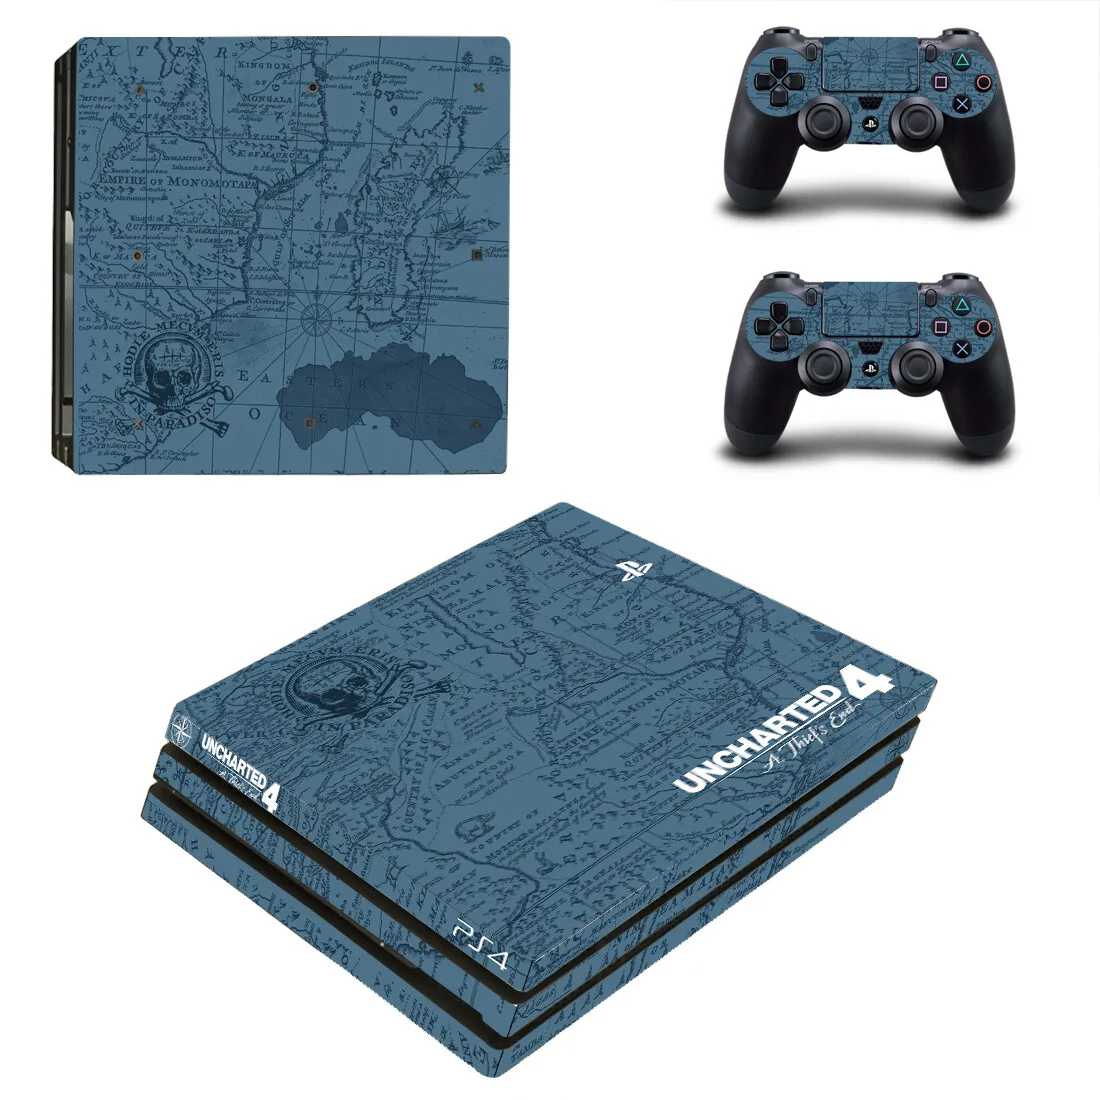 Uncharted 4 PS4 Pro Skin Sticker Decals Cover For PlayStation 4 PS4 Pro Console & Controller Skins Vinyl